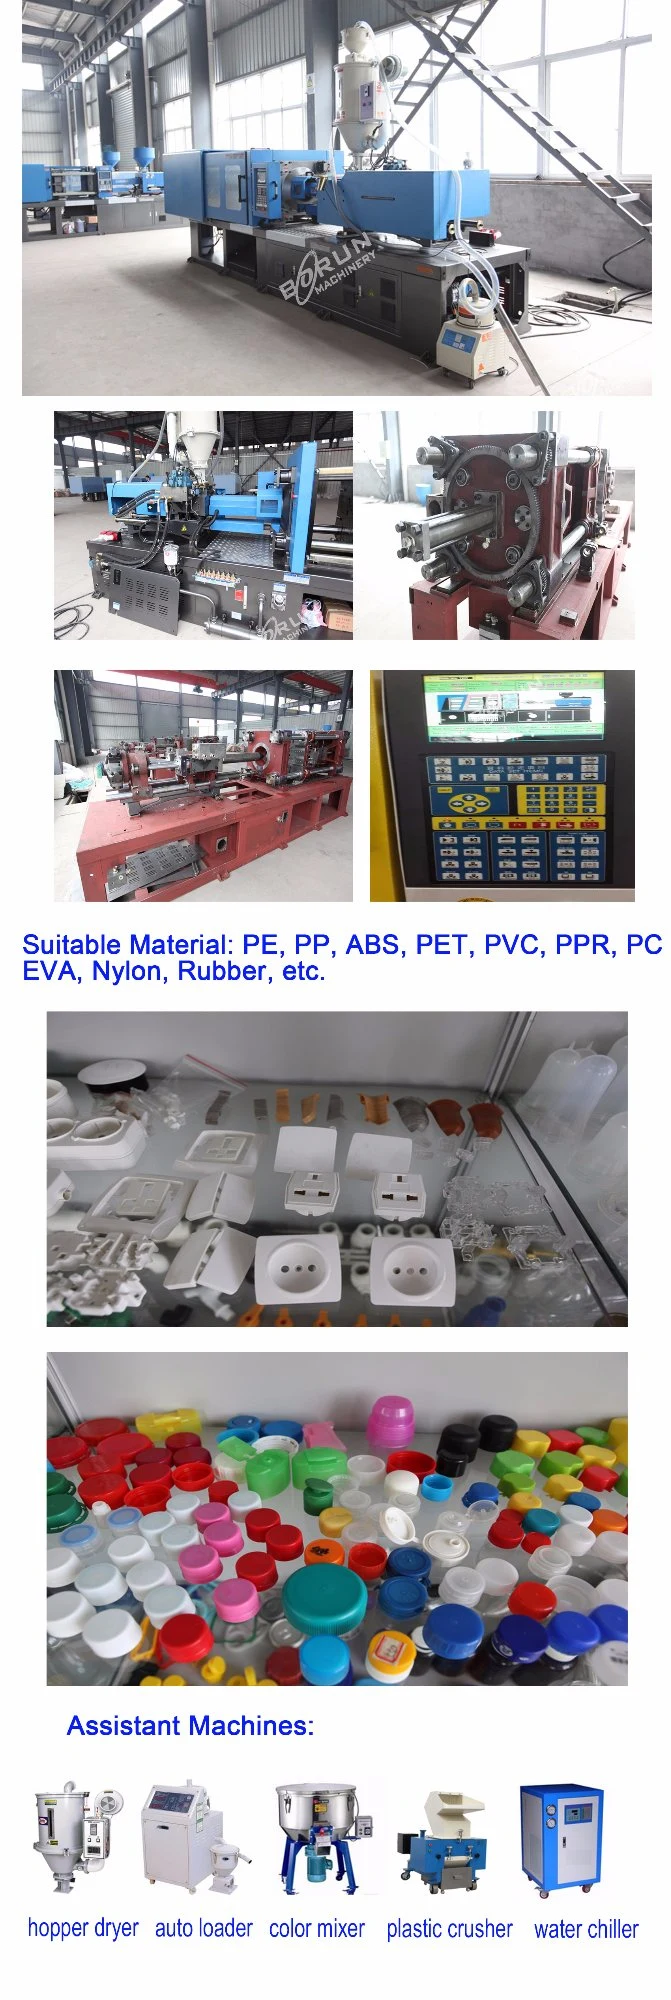 Plastic PVC Pipe Fittings Processing Machine / Injection Molding Machine